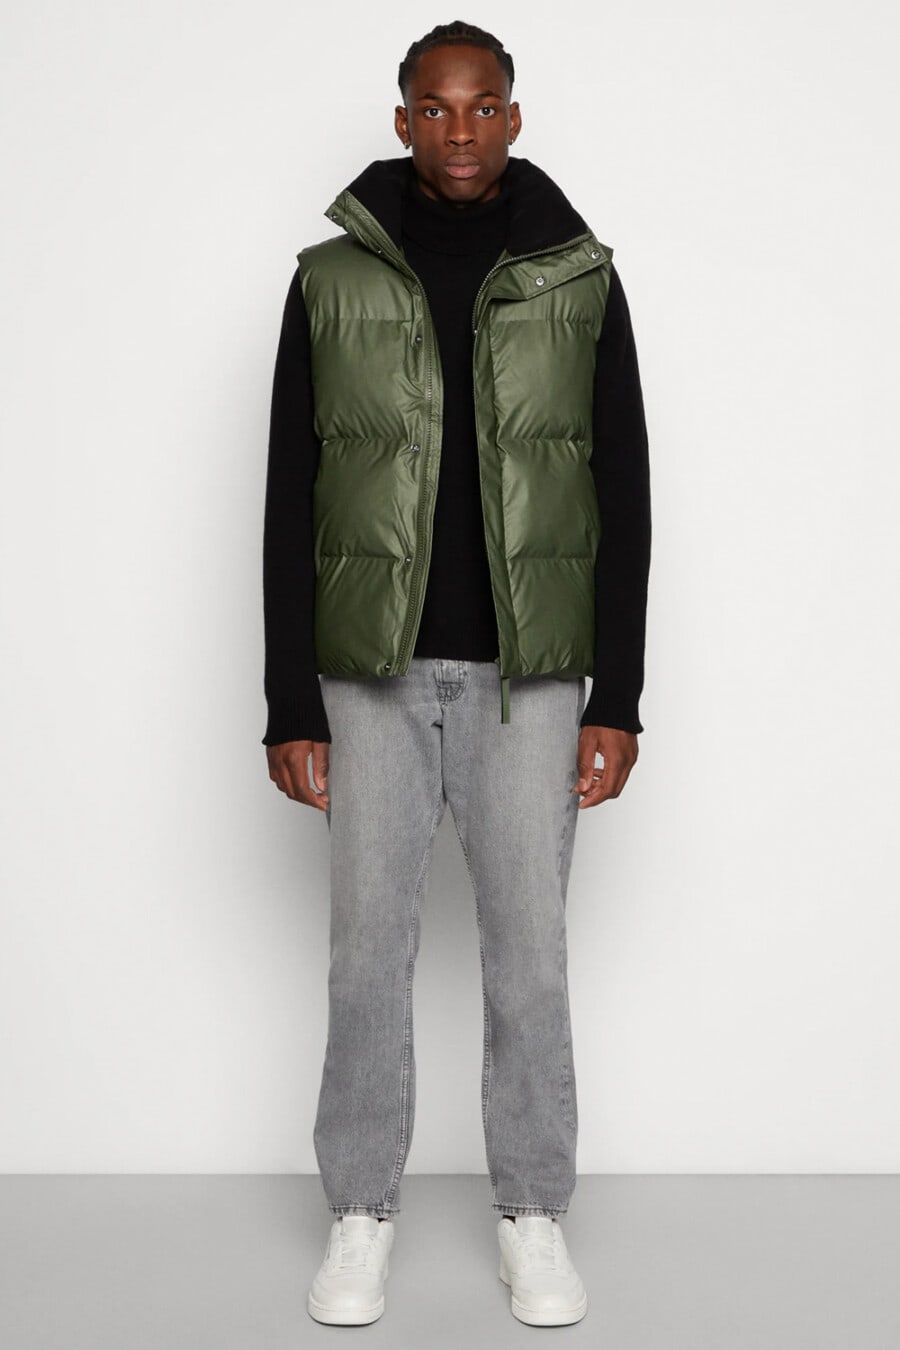 Men's grey jeans, black turtleneck, green puffer vest and white sneakers outfit